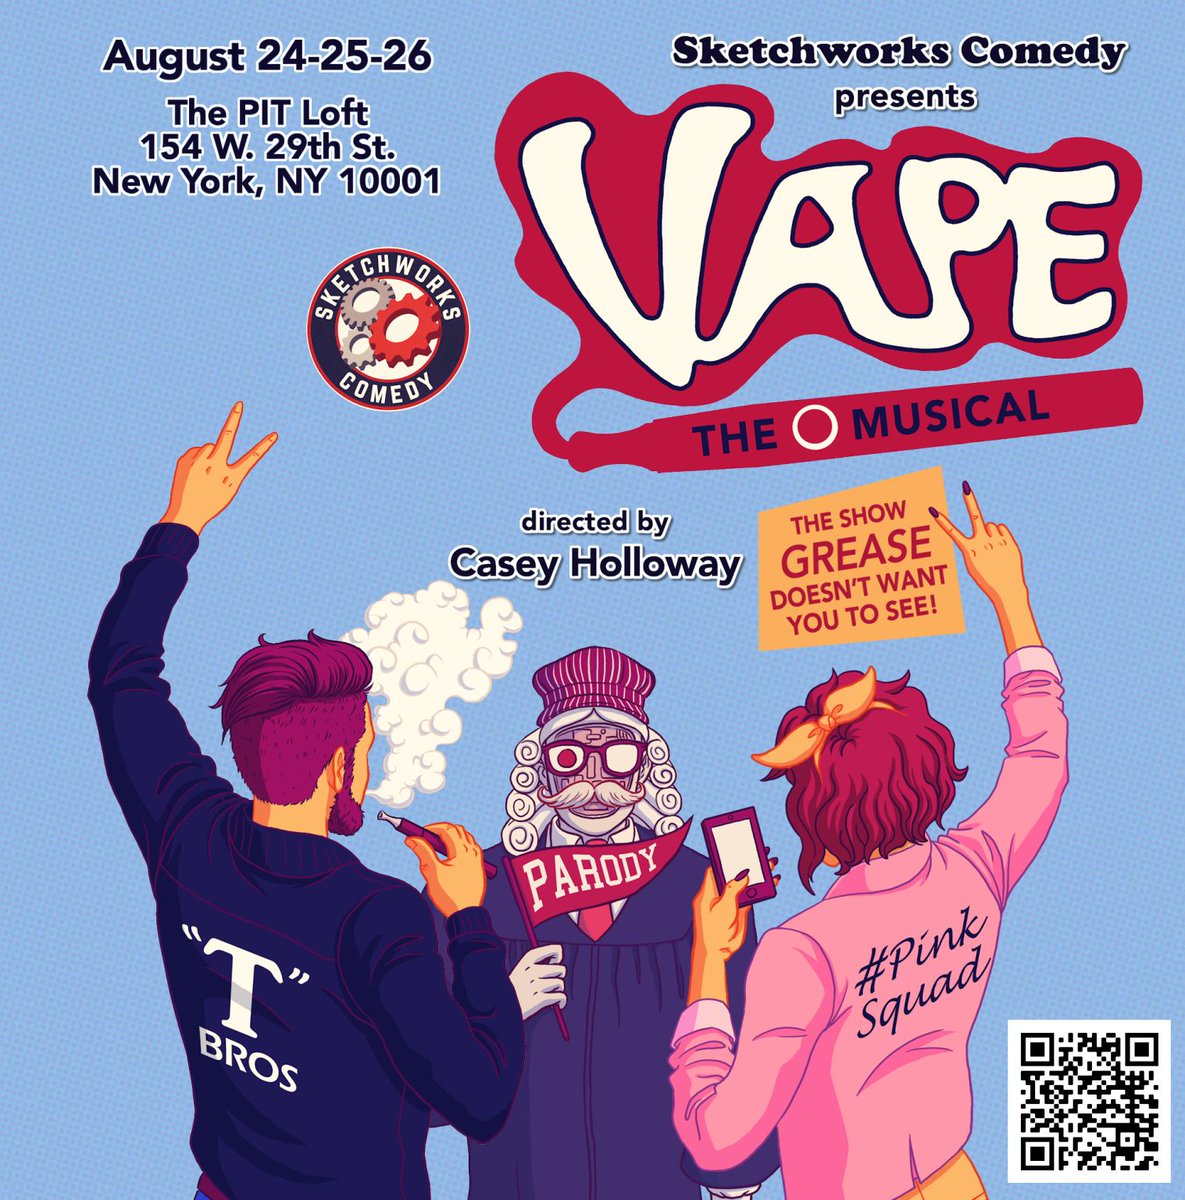 We are 1 WEEK away from our 3-night performance run of VAPE THE MUSICAL at The Peoples Improv Theater in NYC! After a 2 1/2 yr legal battle, @Sketchworks is free to perform our parody of 'Grease'
Get your tickets: lnkd.in/gZU-ZhZP
#nyevents #comedyshow #thingstodoinnewyork